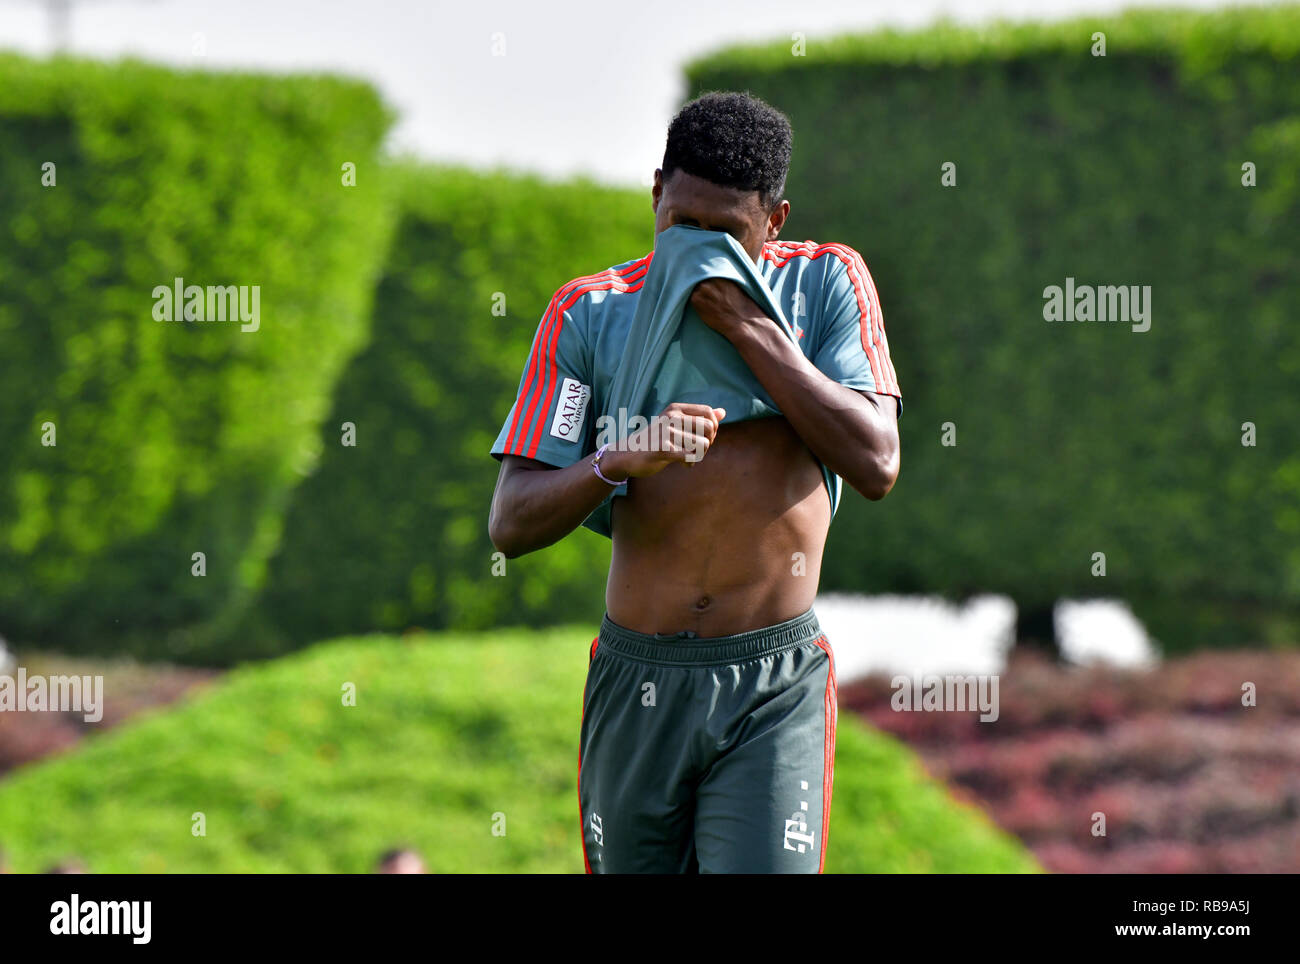 Doha, Qatar. 08th Jan, 2019. Soccer: Bundesliga. David Alaba of FC Bayern  Munich, the Bundesliga soccer team, wipes sweat from his face during a  morning practice session. FC Bayern will stay in